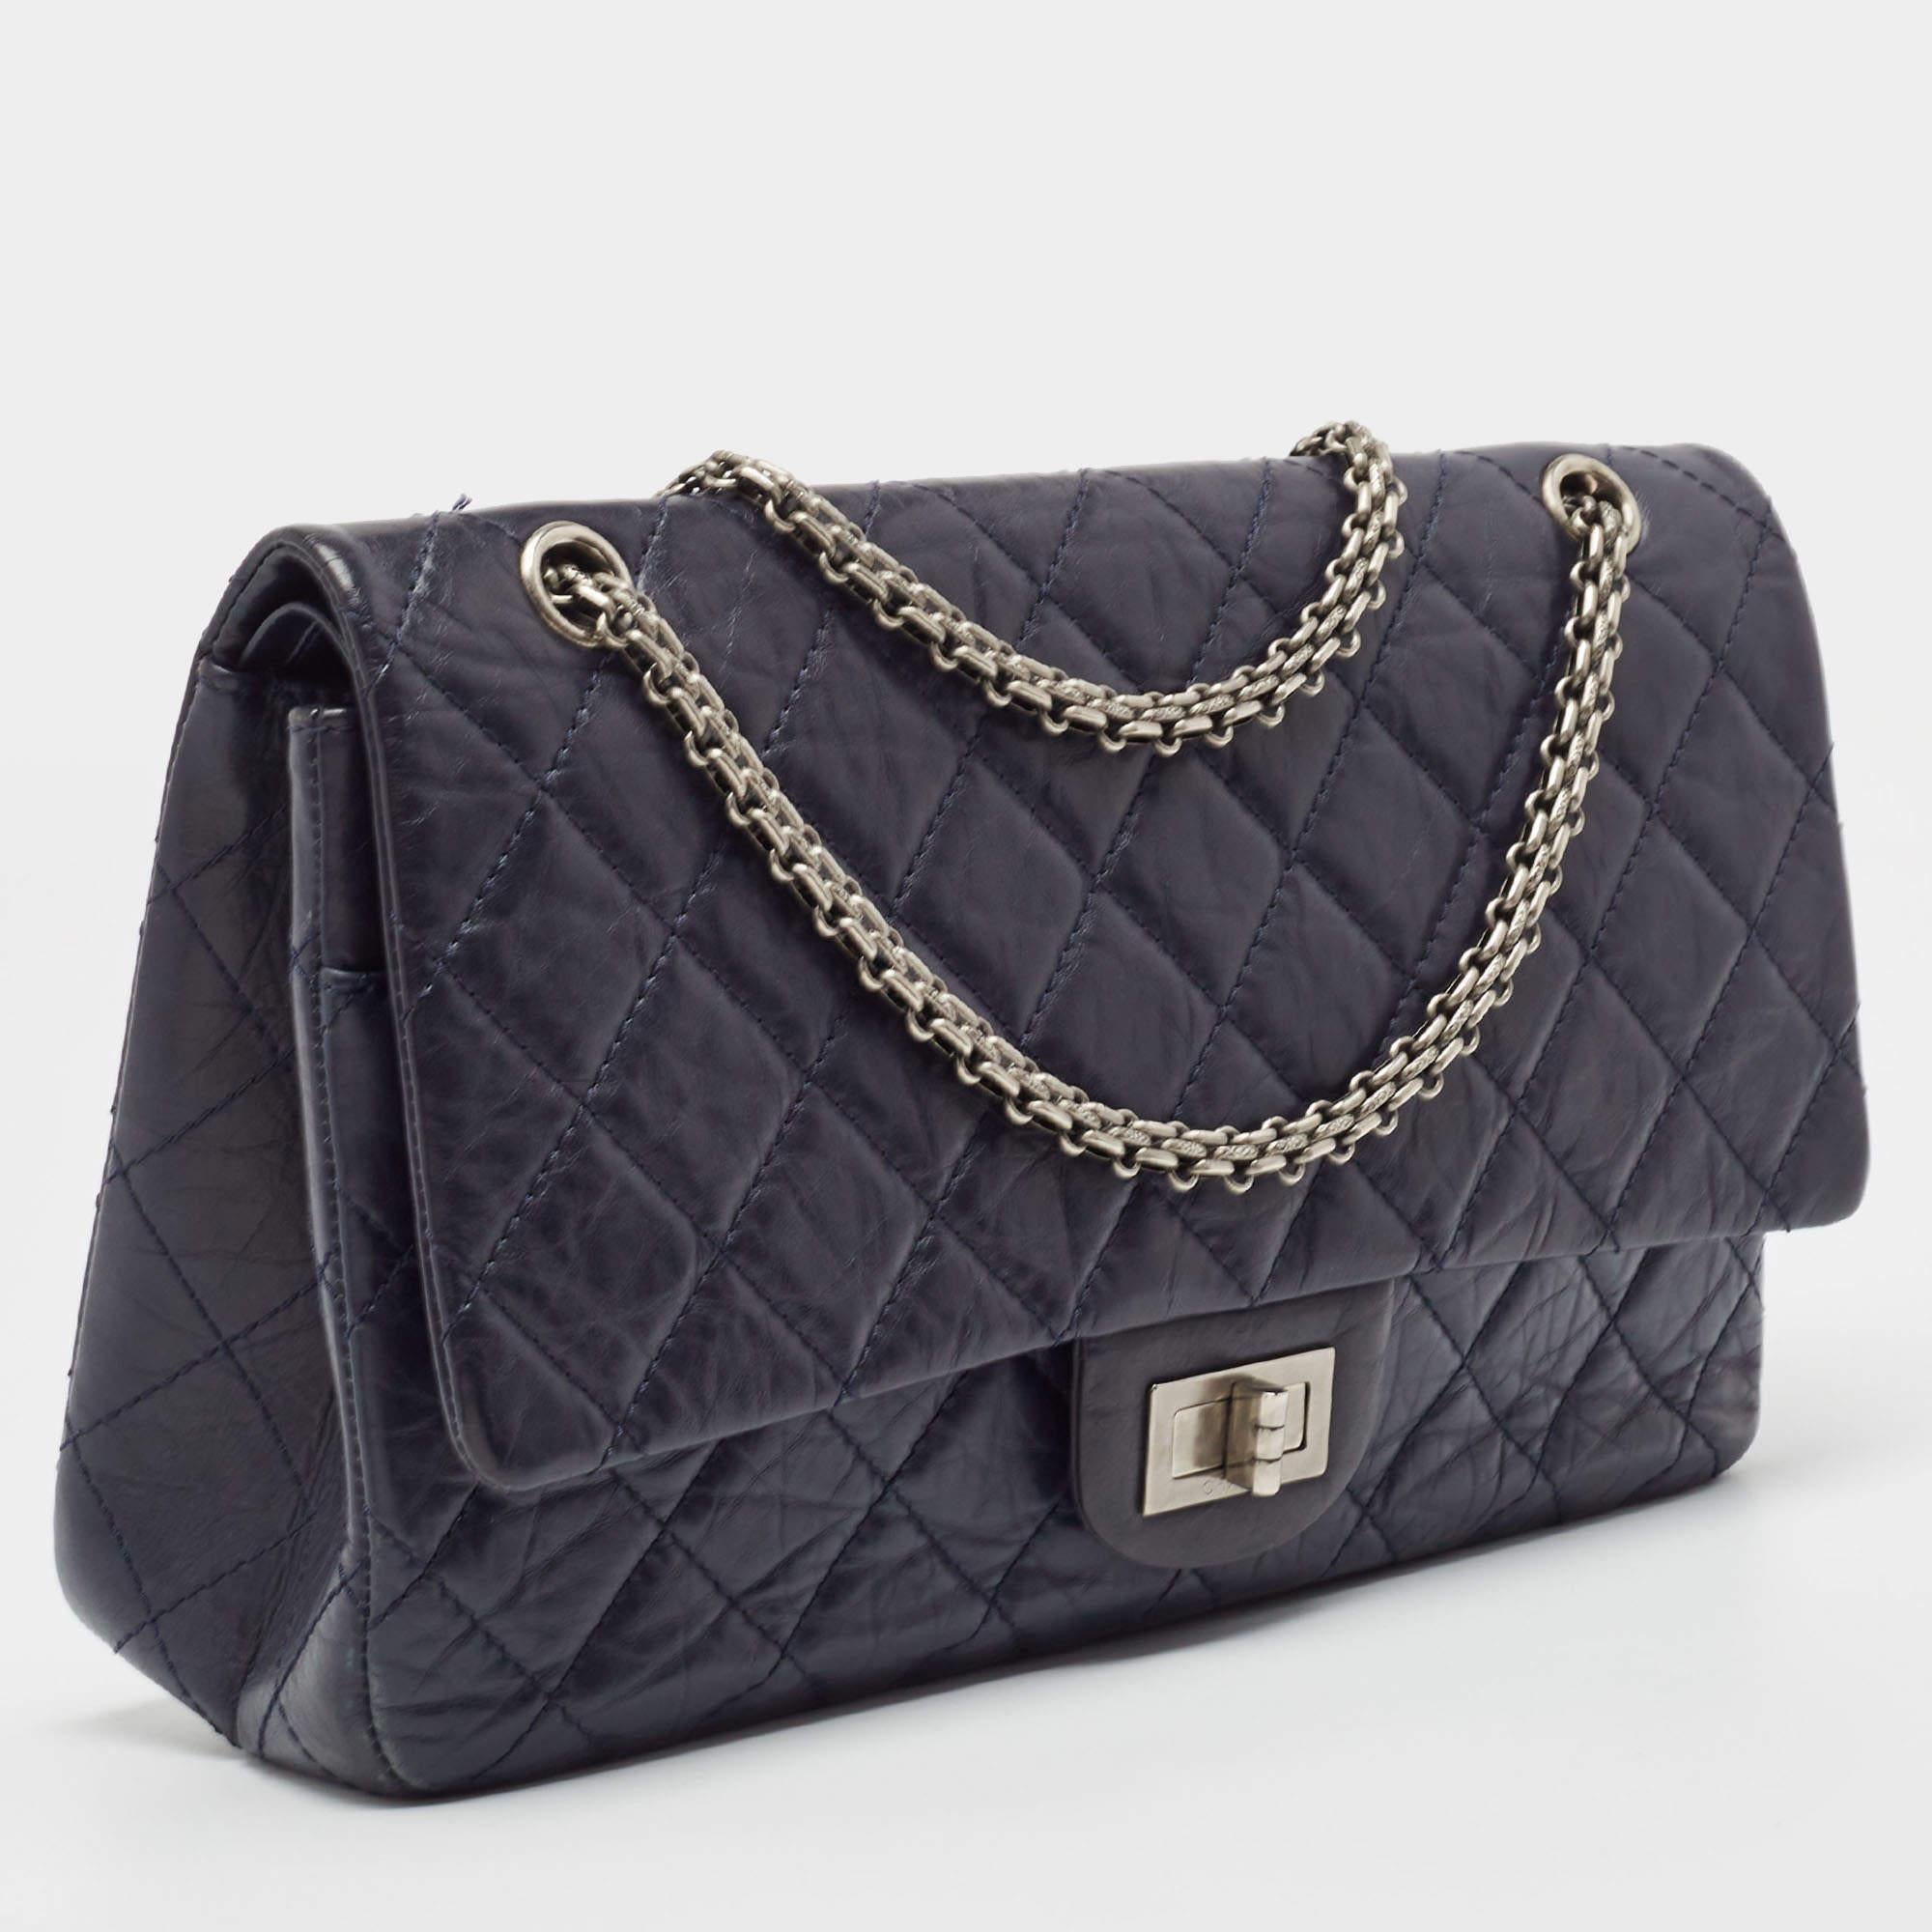 Indulge in timeless luxury with this Chanel 227 Reissue 2.55 flap bag. Meticulously crafted, this iconic piece combines heritage, elegance, and craftsmanship, elevating your style to a level of unmatched sophistication.

